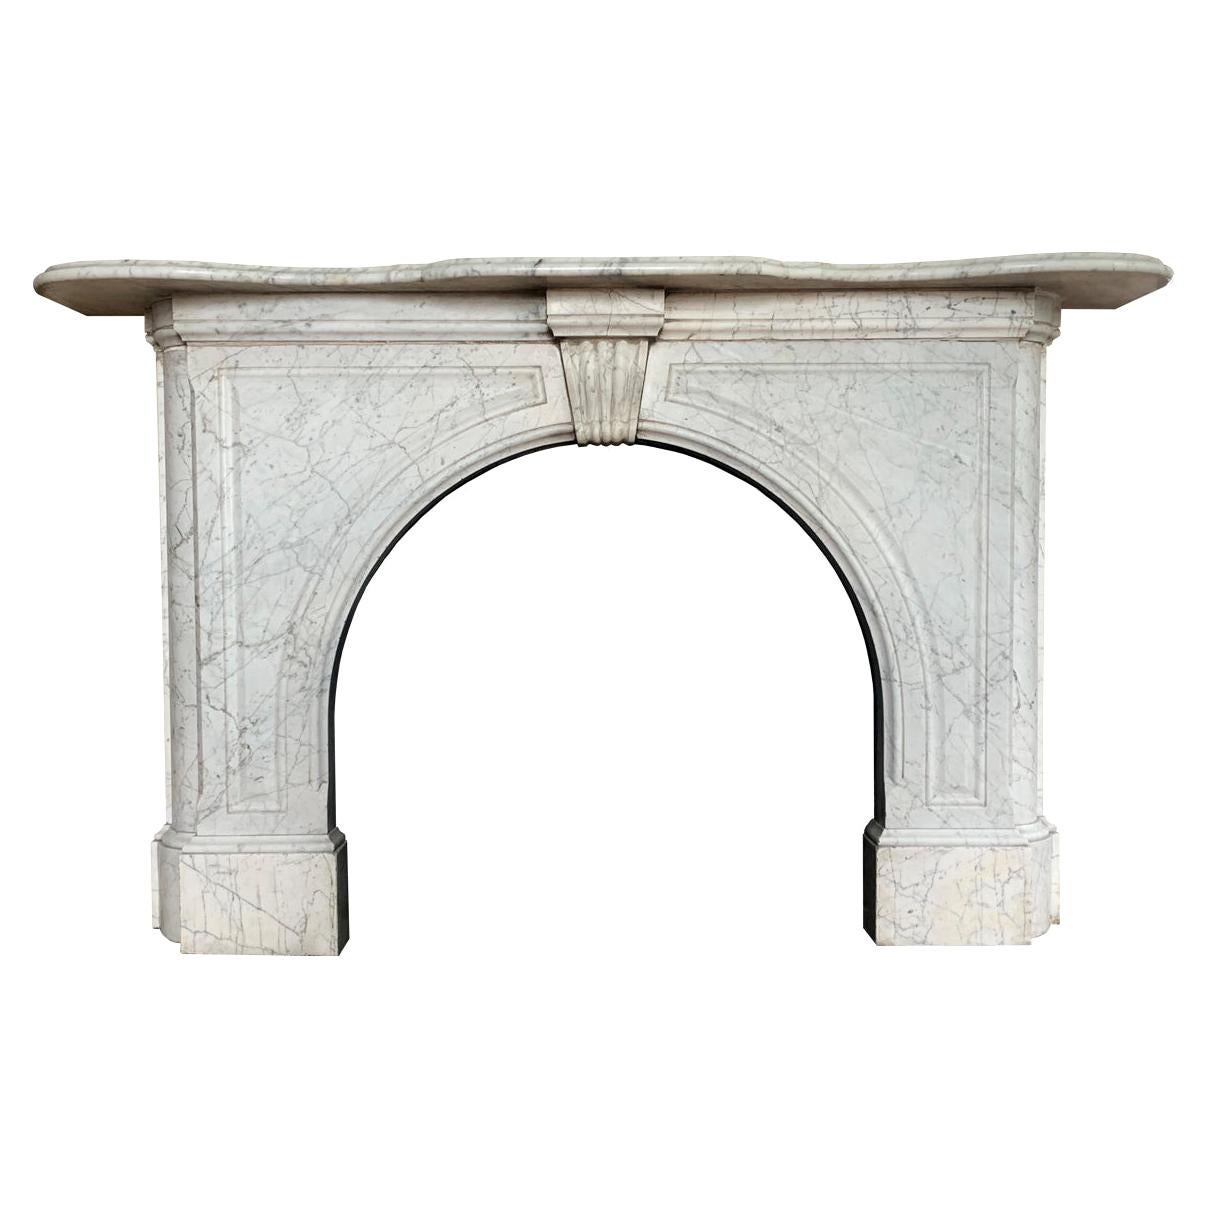 Large 19th Century Mid-Victorian Arched Carrara Marble Fireplace Surround